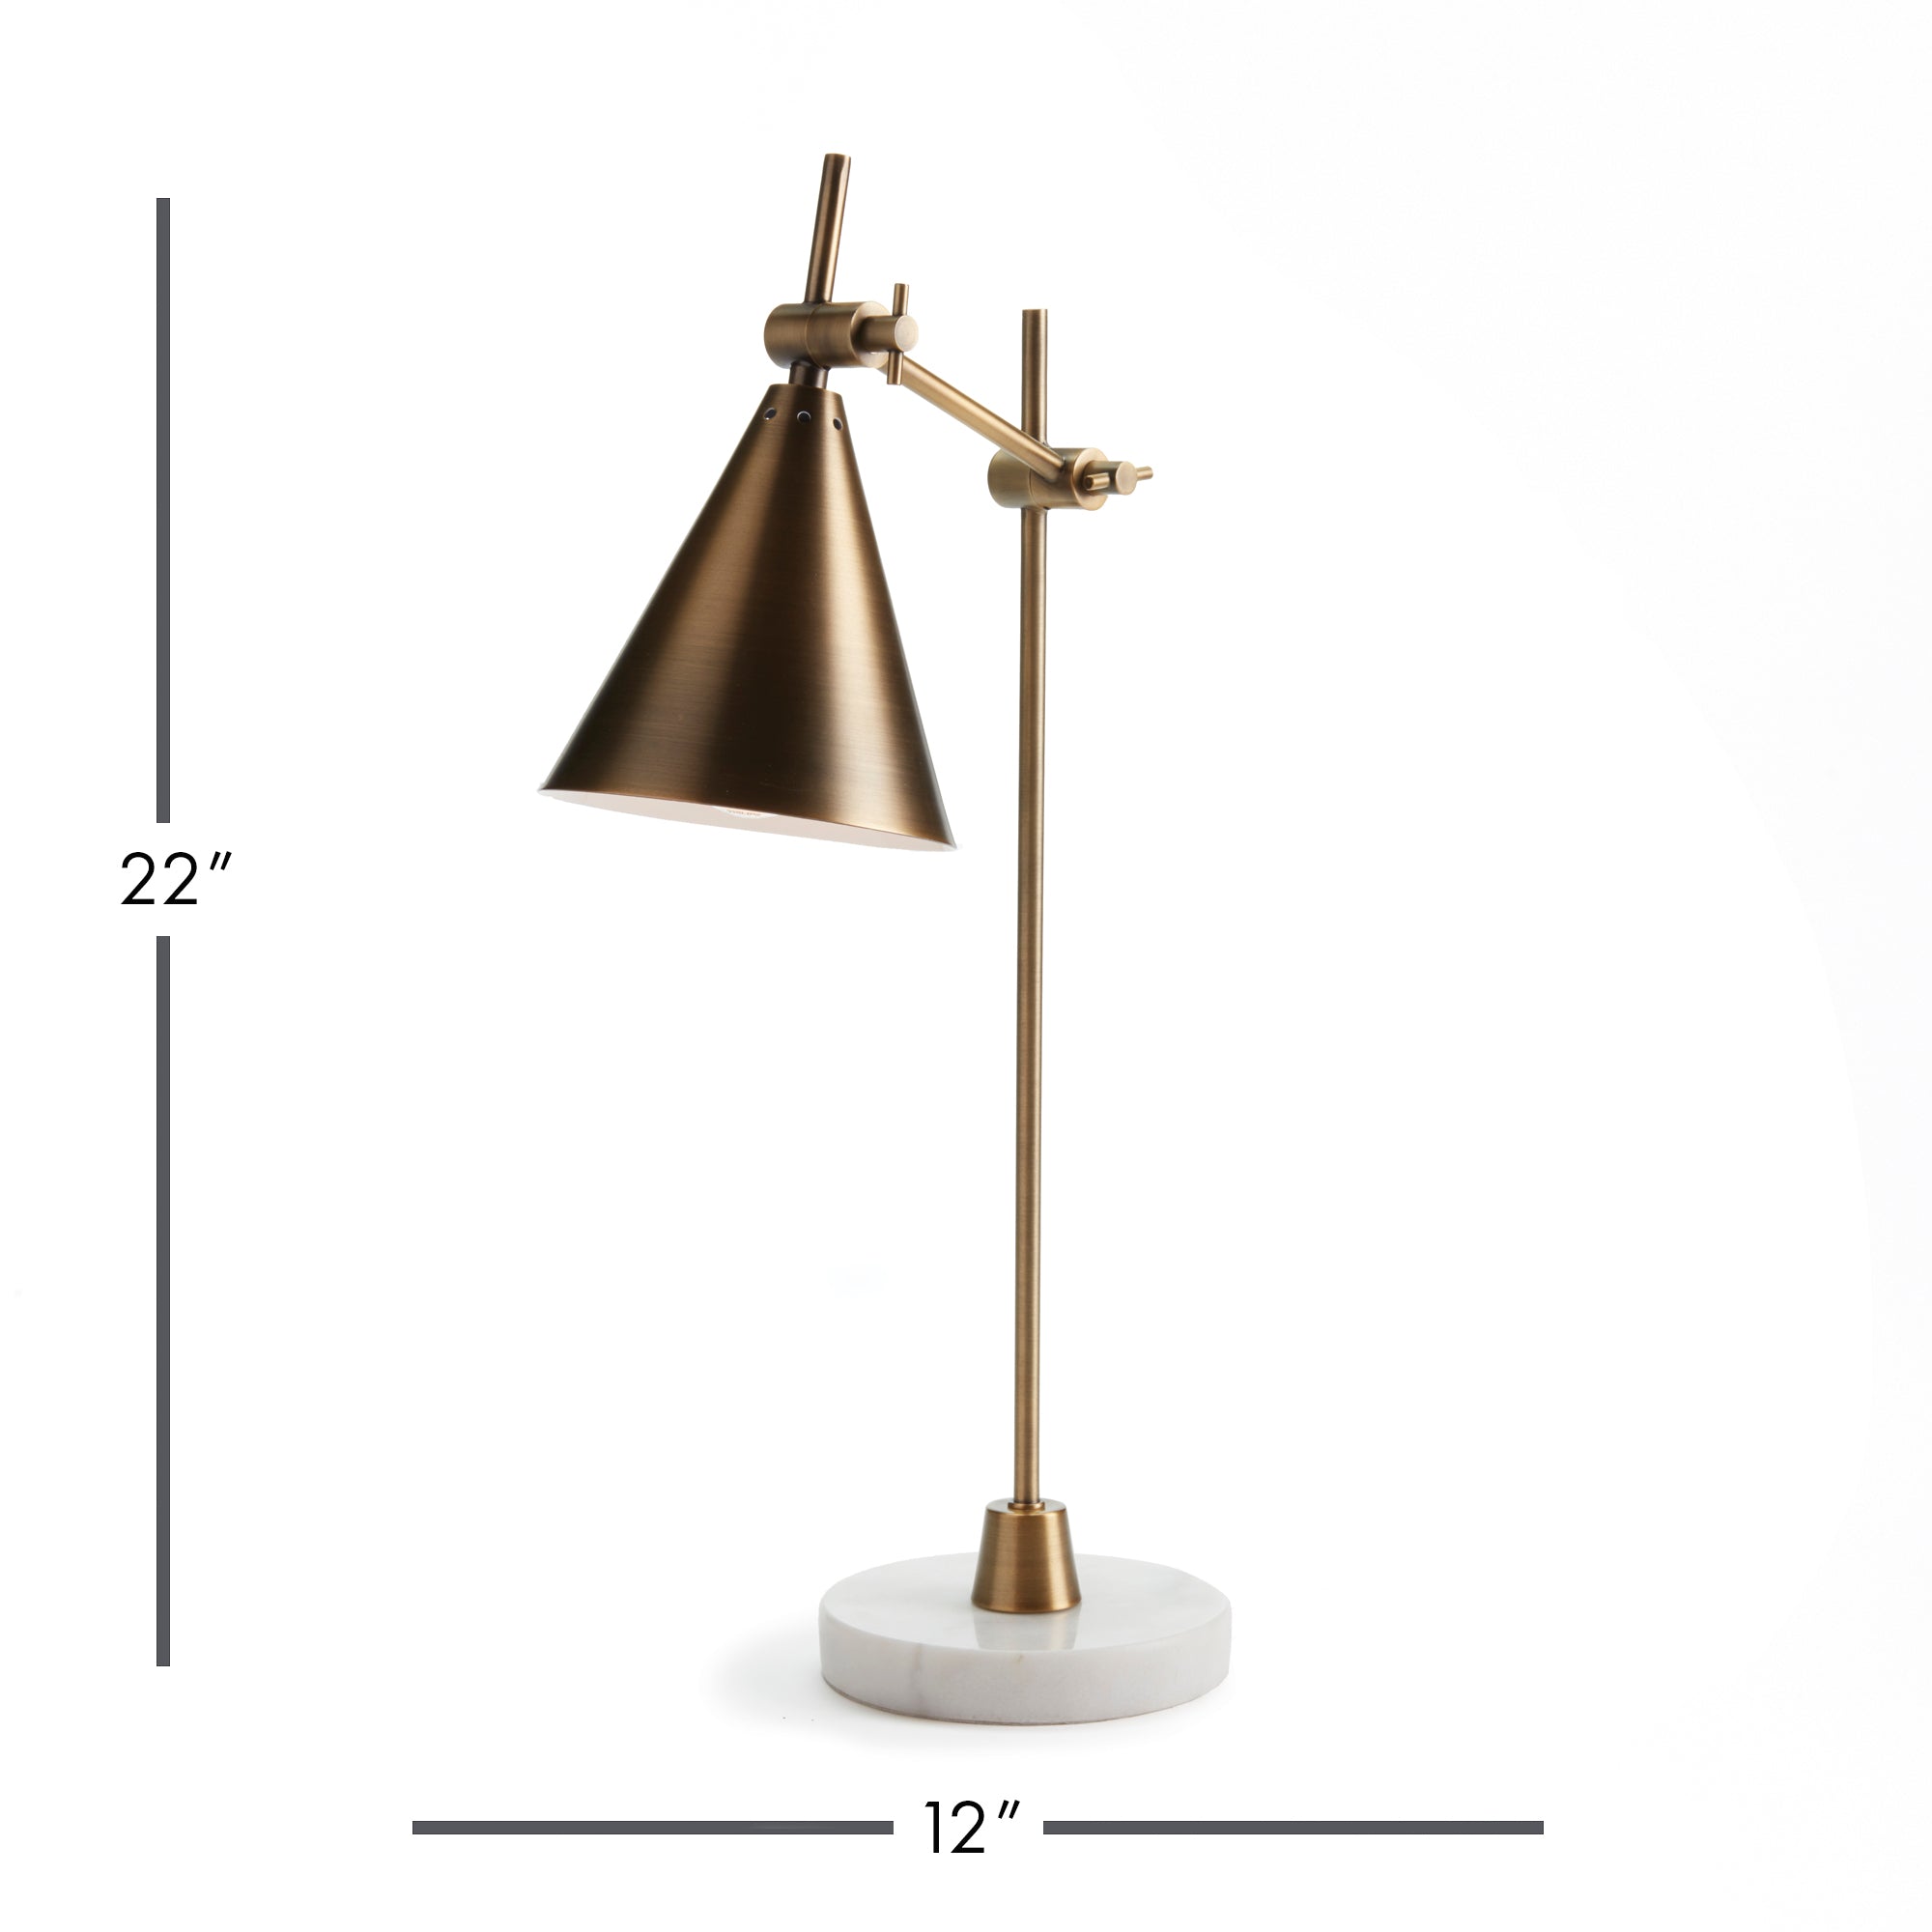 With a dually adjustable design, the Arnoldi Desk Lamp is modern architecture for the room. The brass finish and marble base give it a touch of classic elegance. Amethyst Home provides interior design, new construction, custom furniture, and area rugs in the Winter Garden metro area.